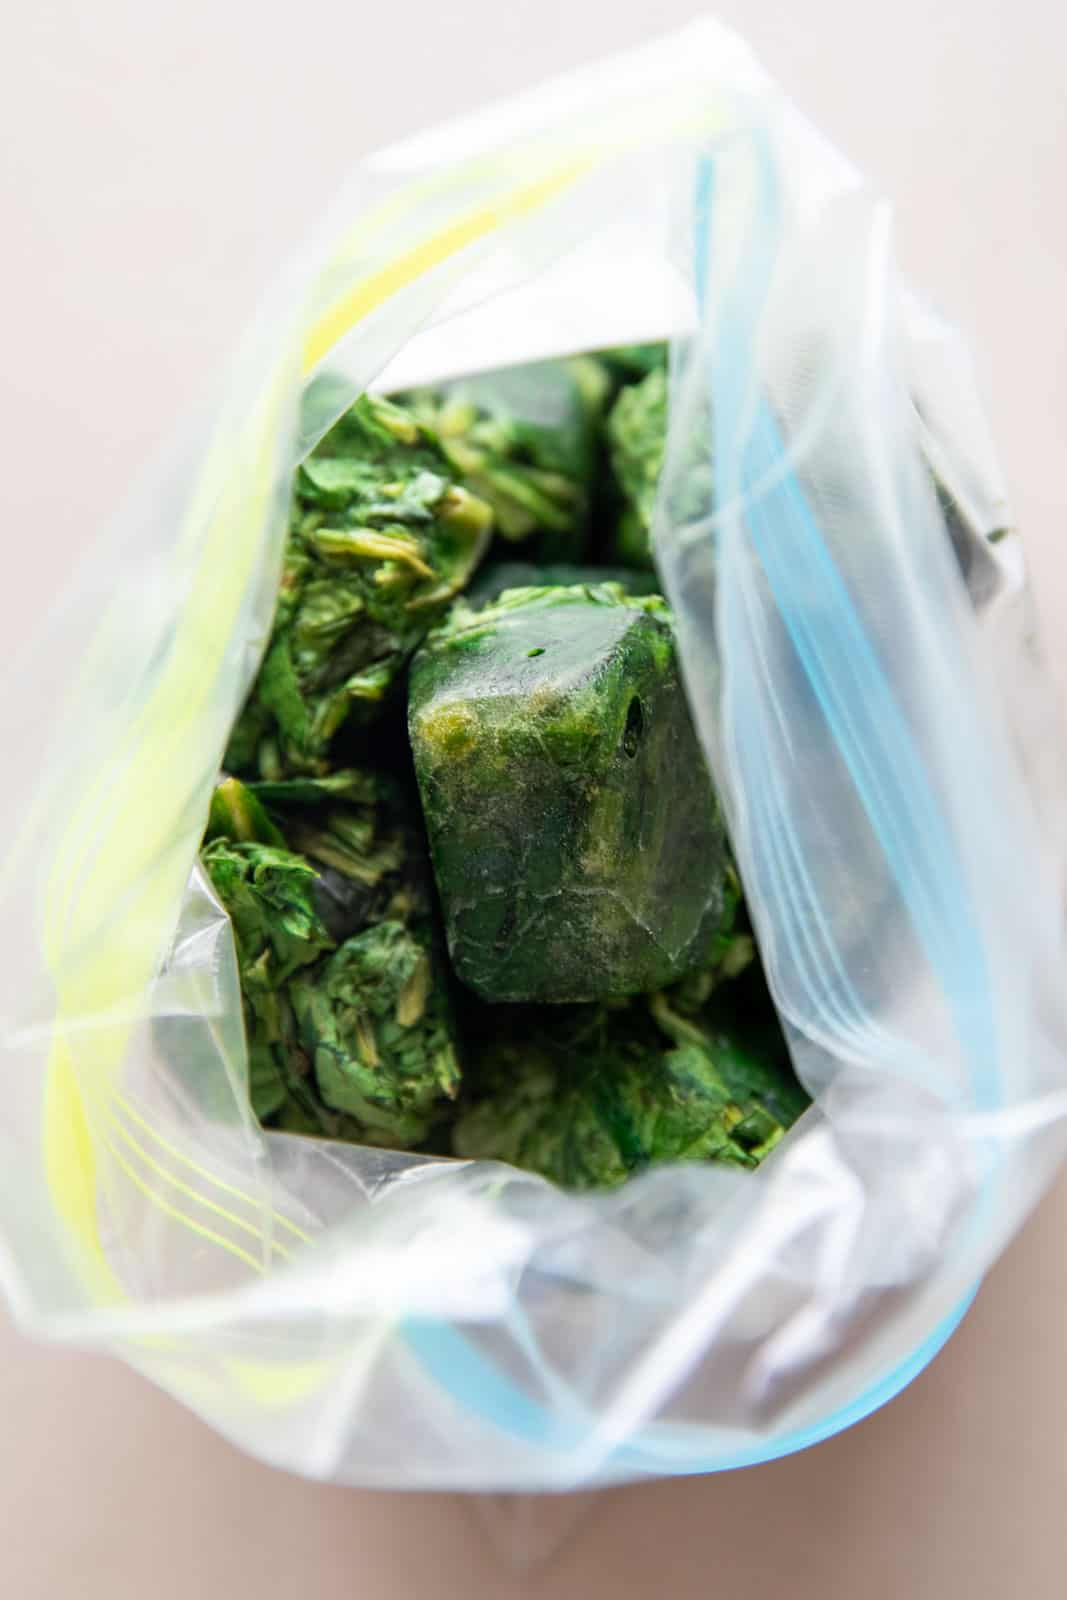 Frozen spinach cubes stored in a ziplock bag for use later